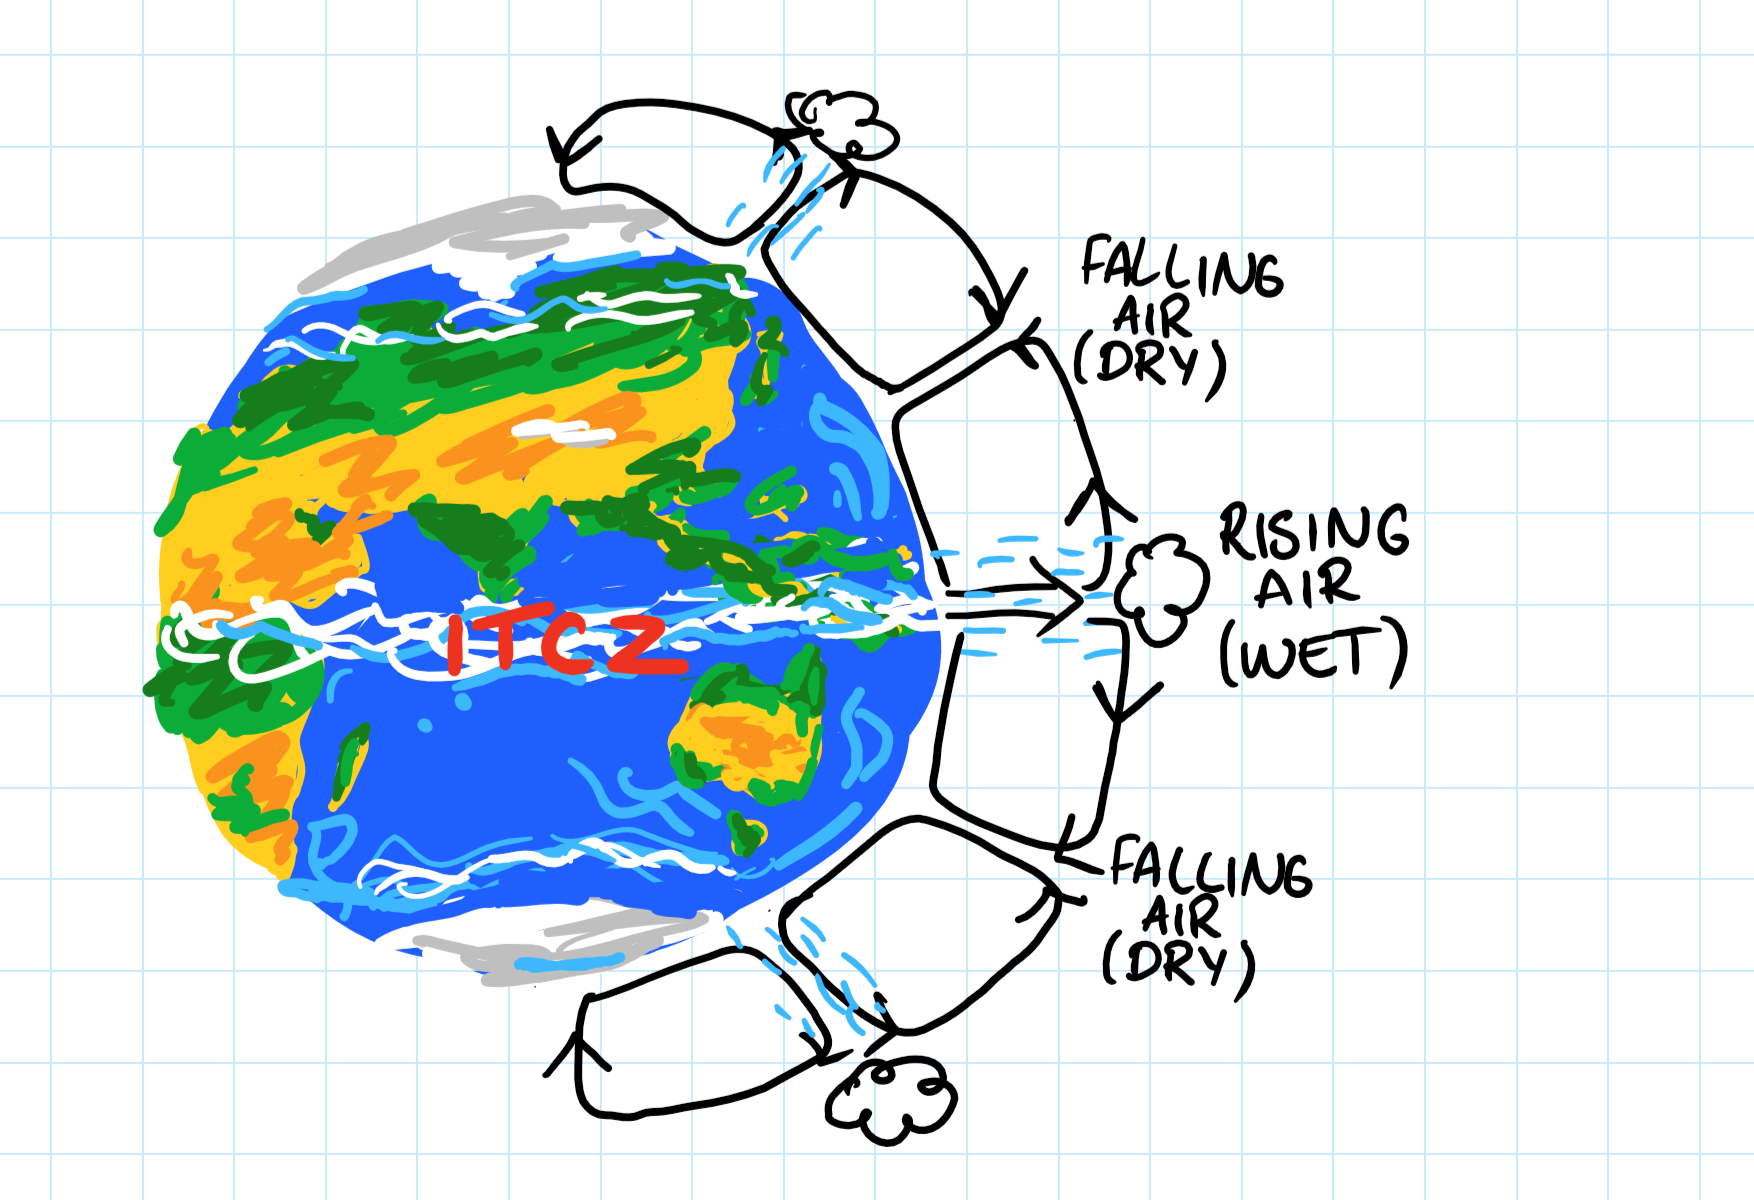 Awesome hand drawn graphic of the earth and the sun showing the air rising around the equator